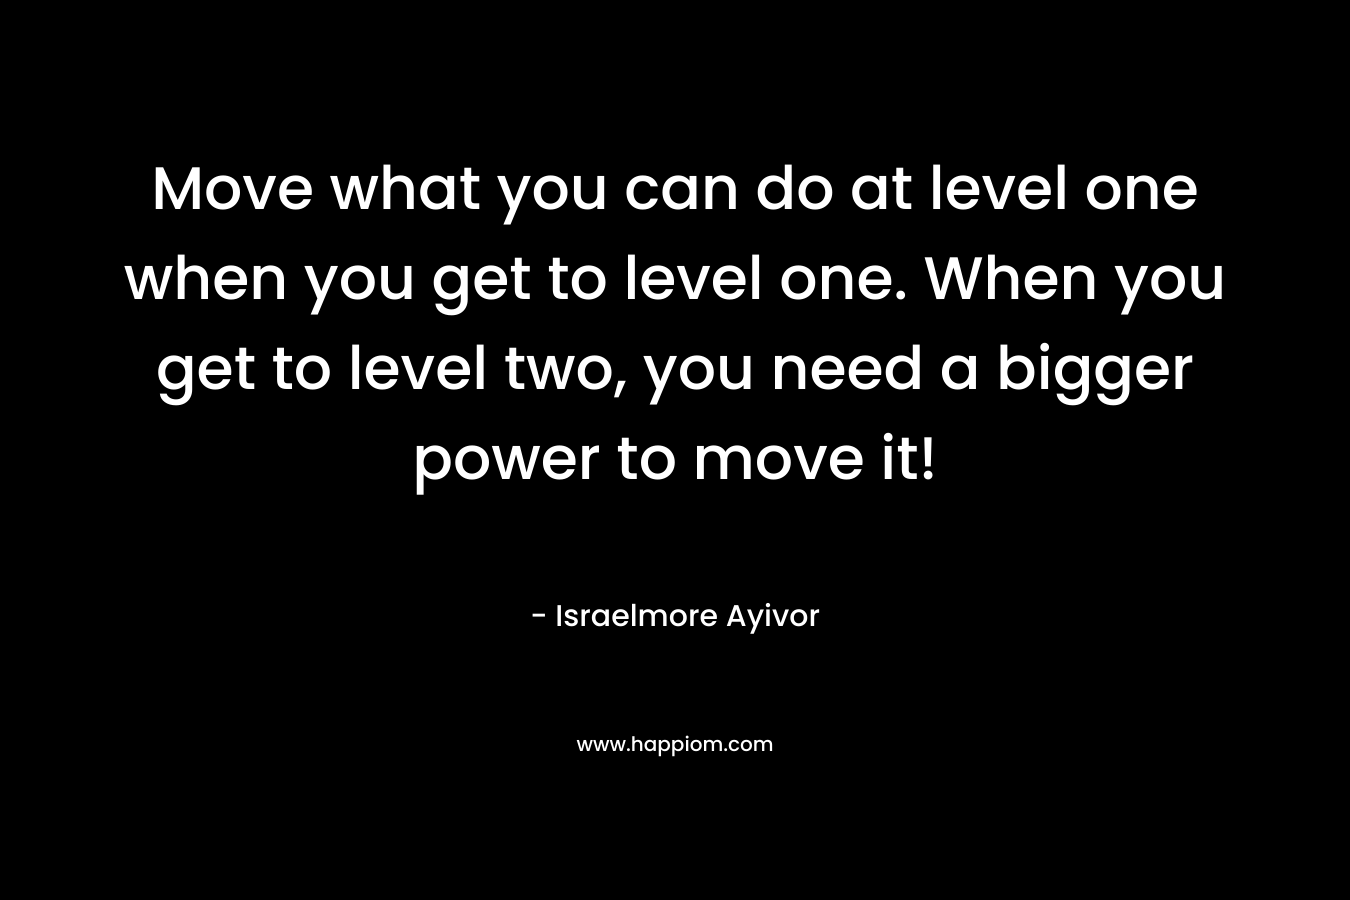 Move what you can do at level one when you get to level one. When you get to level two, you need a bigger power to move it!